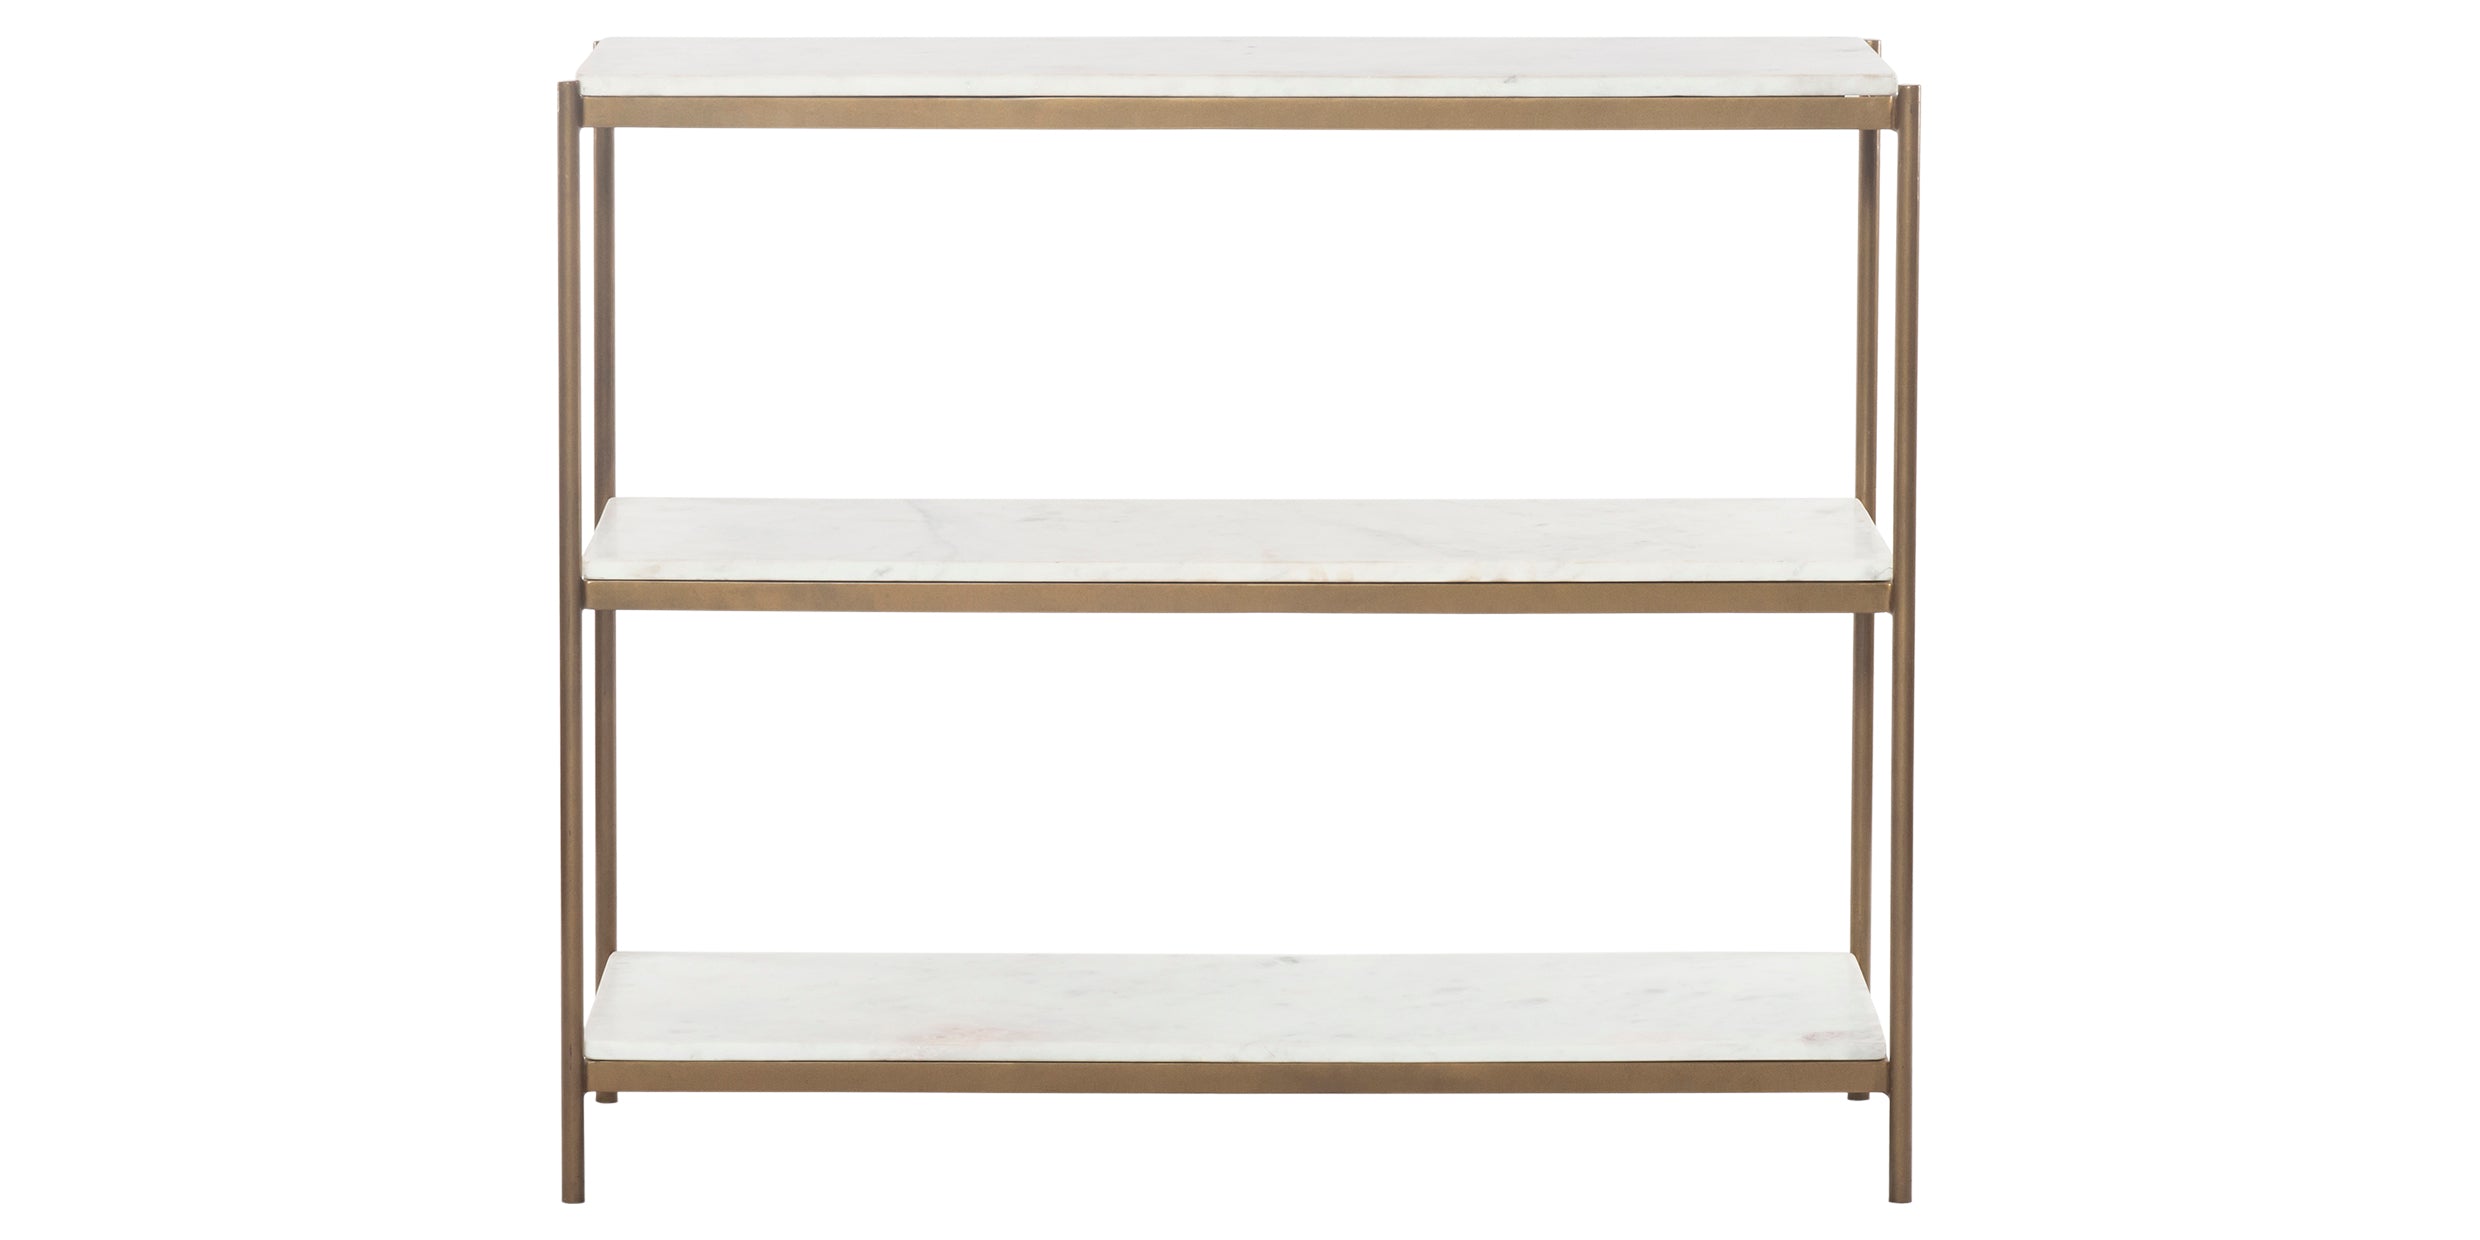 Polished White Marble with Antique Brass Iron | Felix Small Console Table | Valley Ridge Furniture